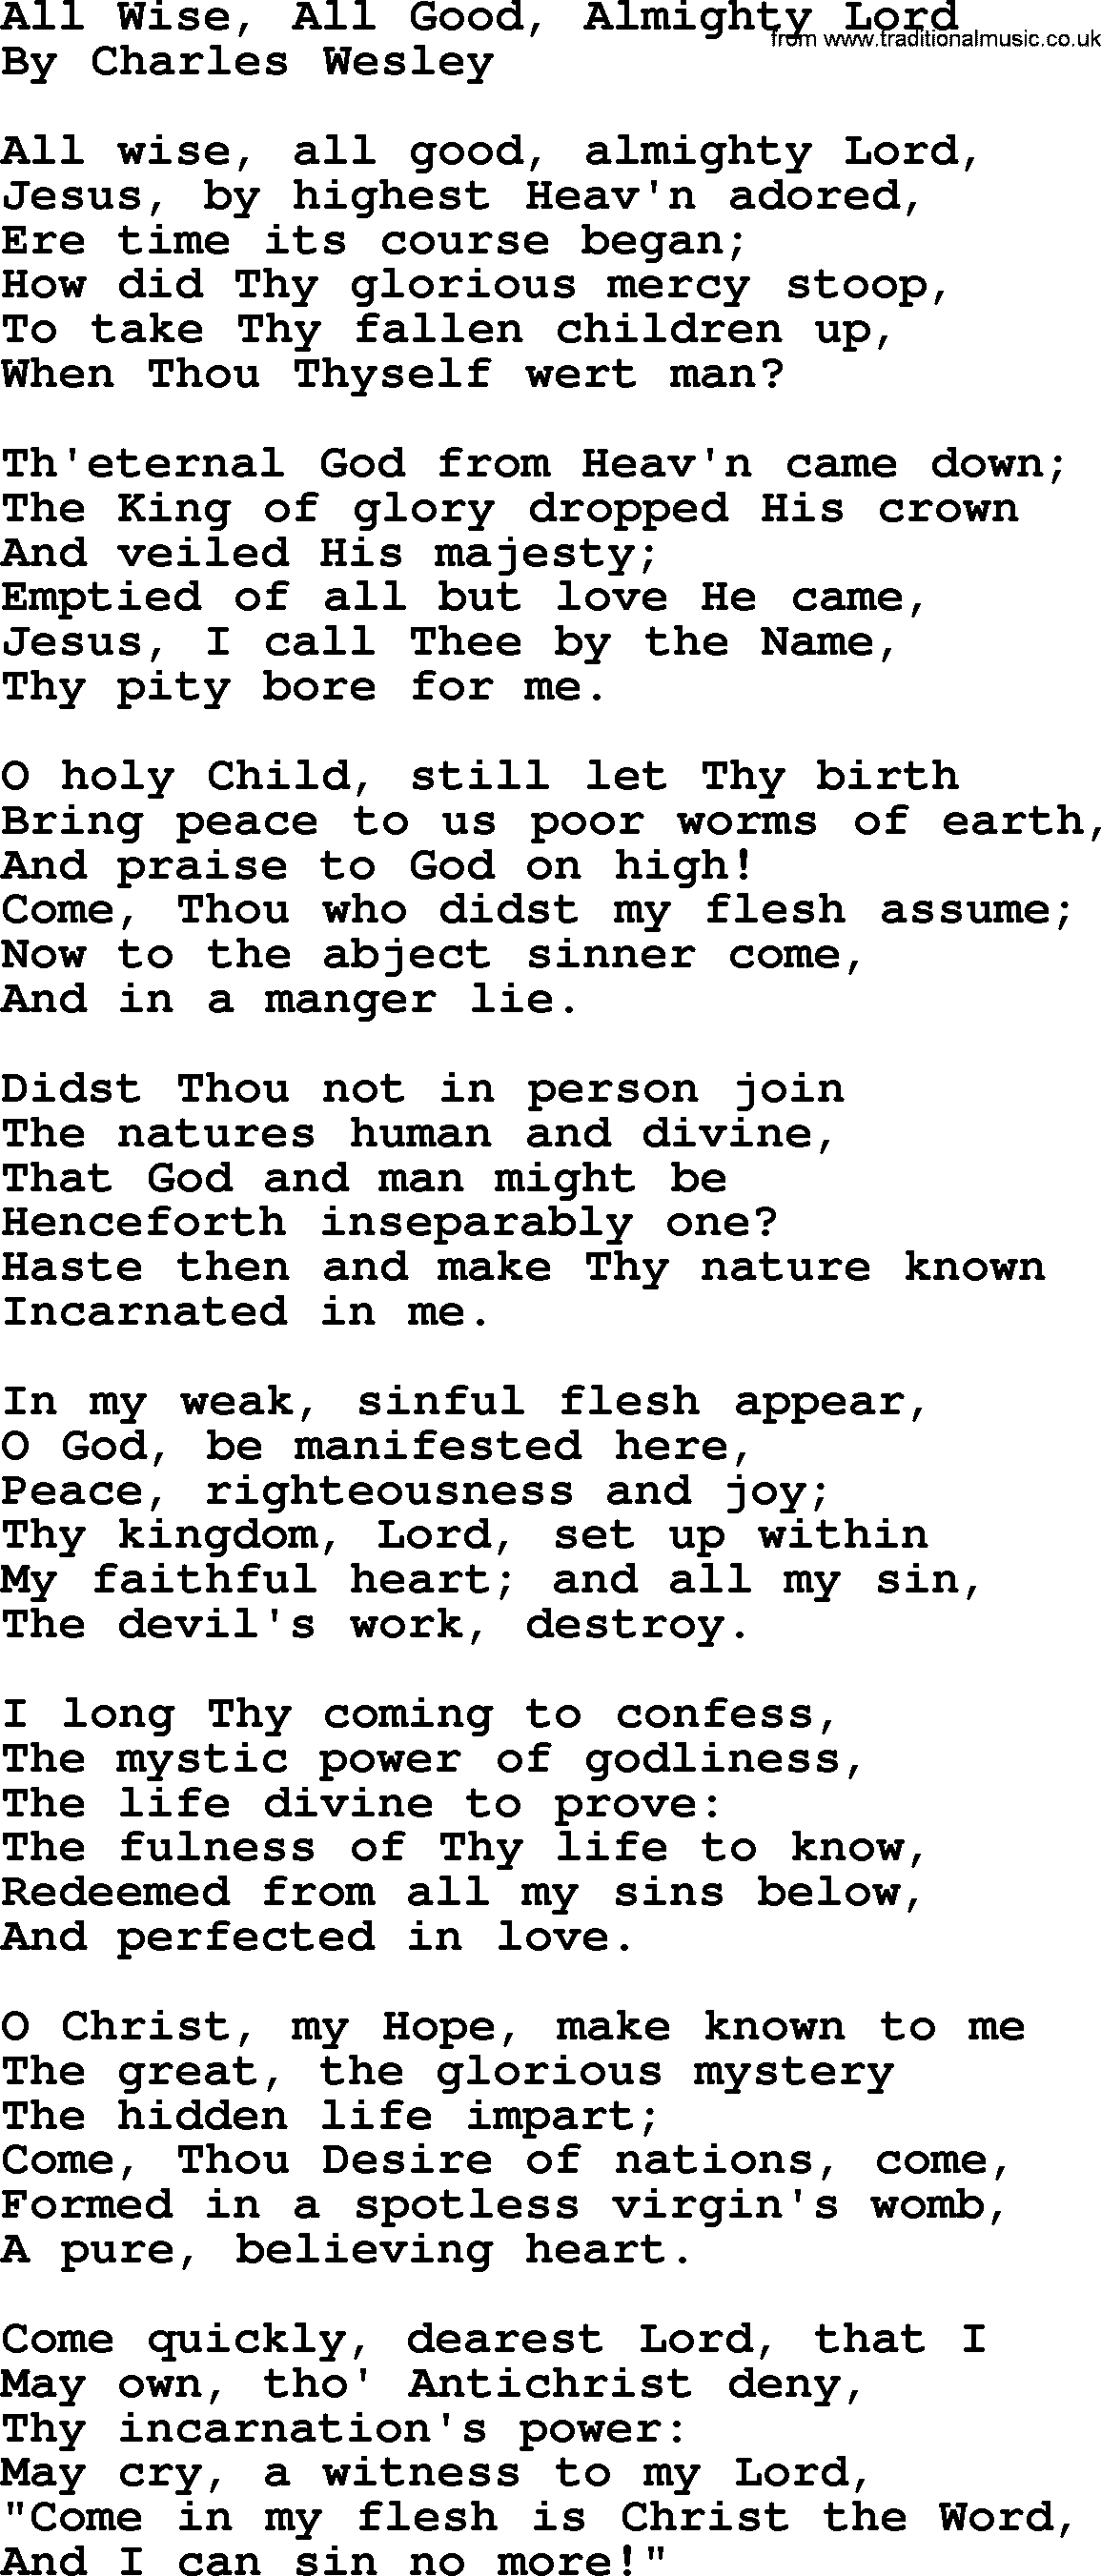 Charles Wesley hymn: All Wise, All Good, Almighty Lord, lyrics